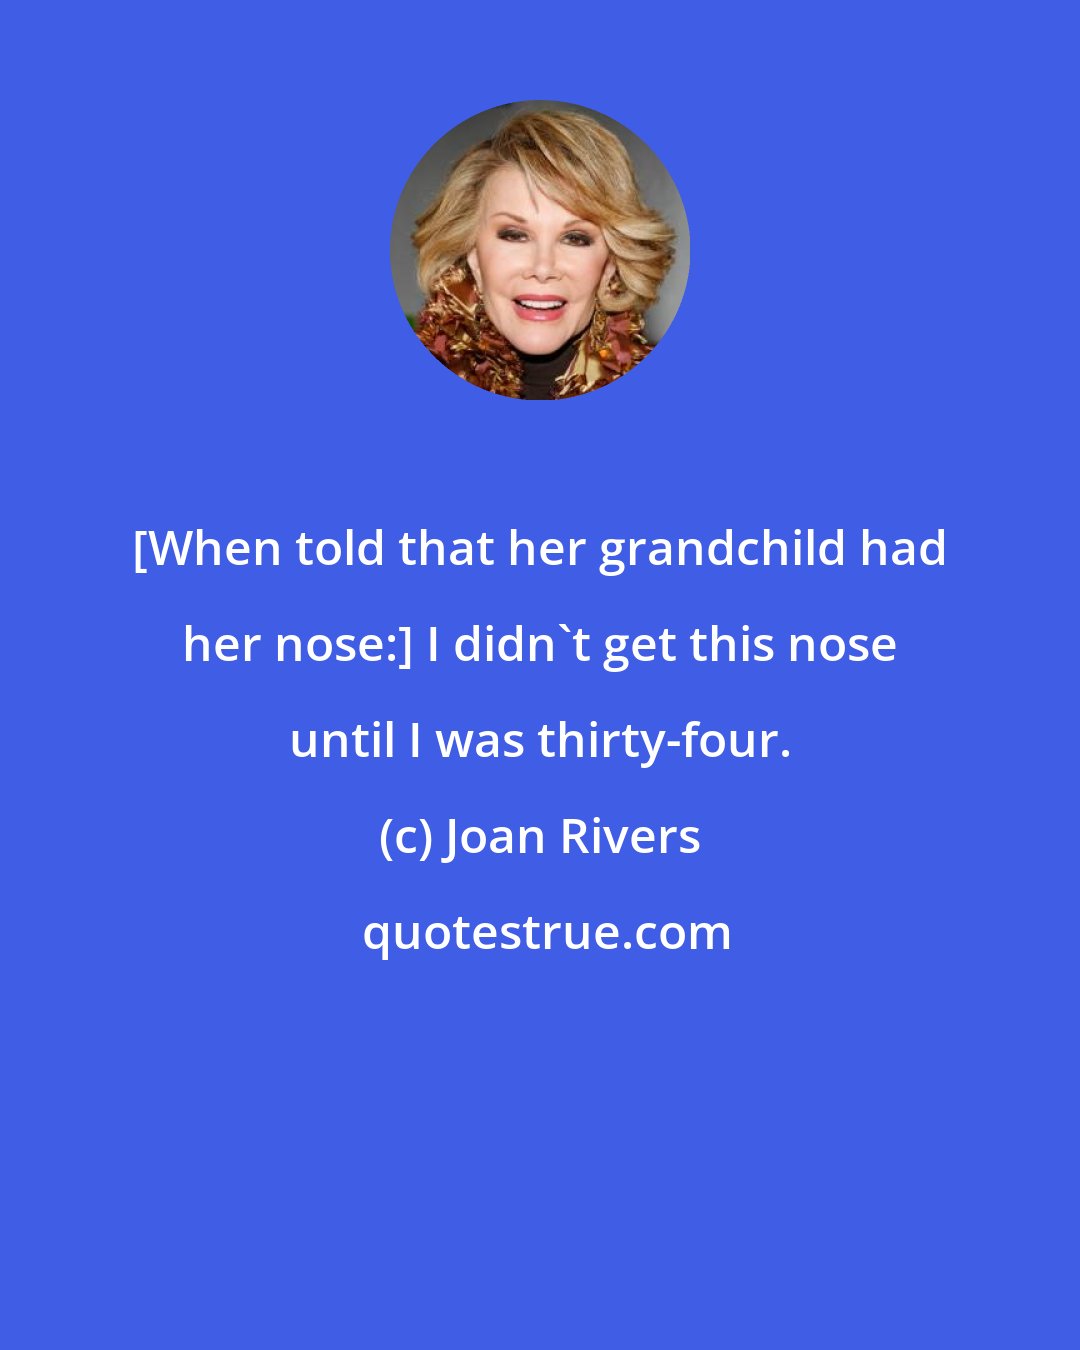 Joan Rivers: [When told that her grandchild had her nose:] I didn't get this nose until I was thirty-four.